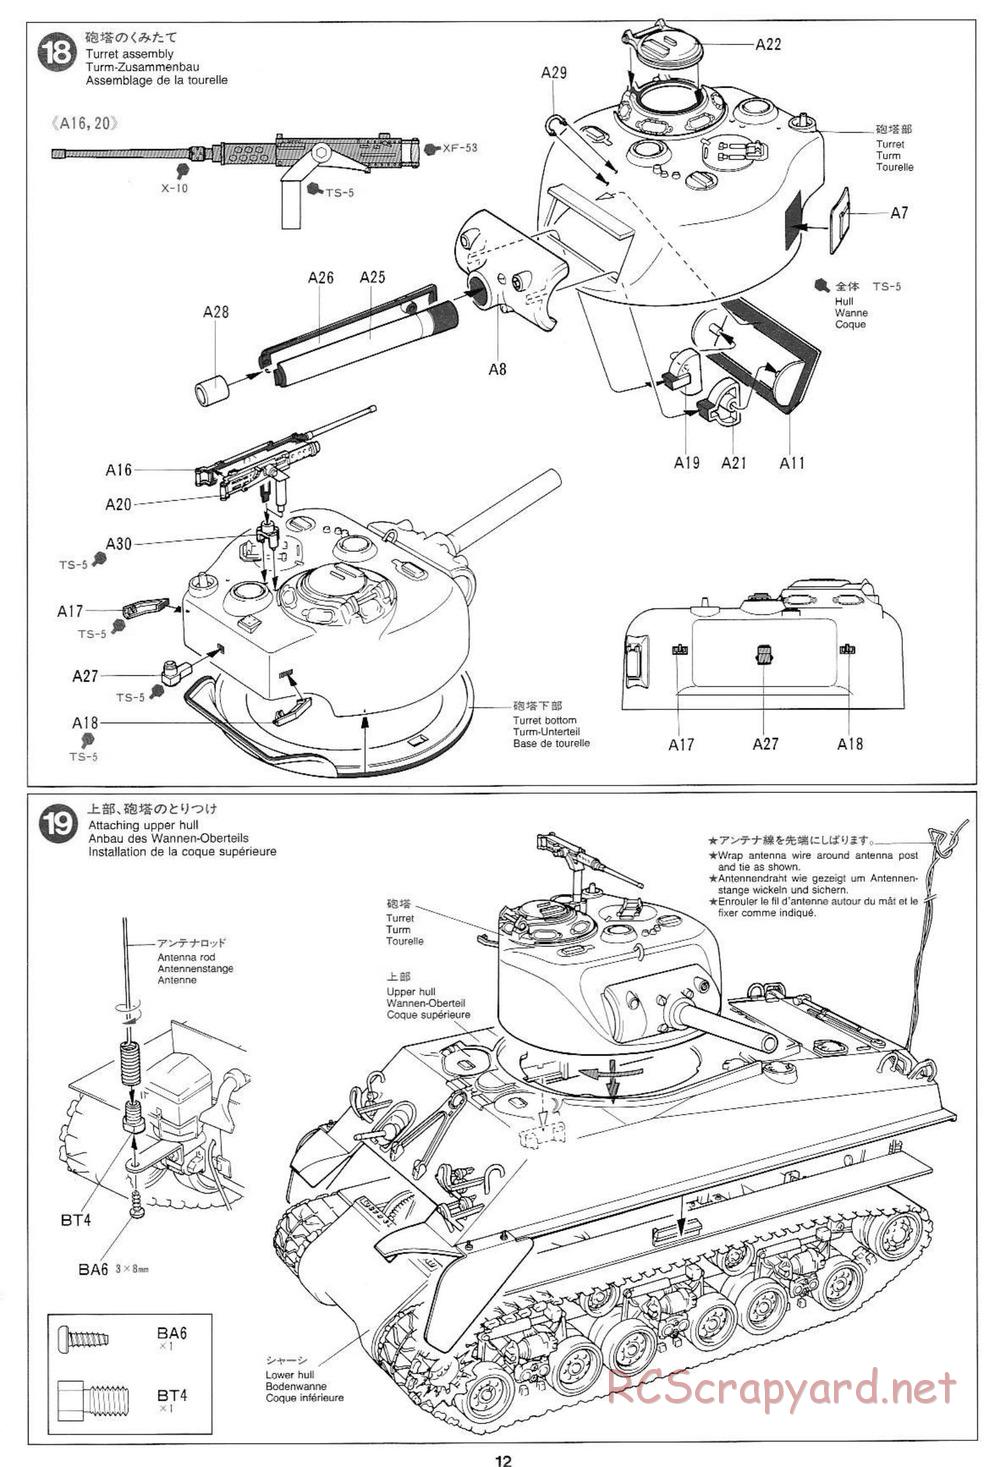 Tamiya - M4 Sherman 105mm Howitzer - 1/16 Scale Chassis - Manual - Page 12